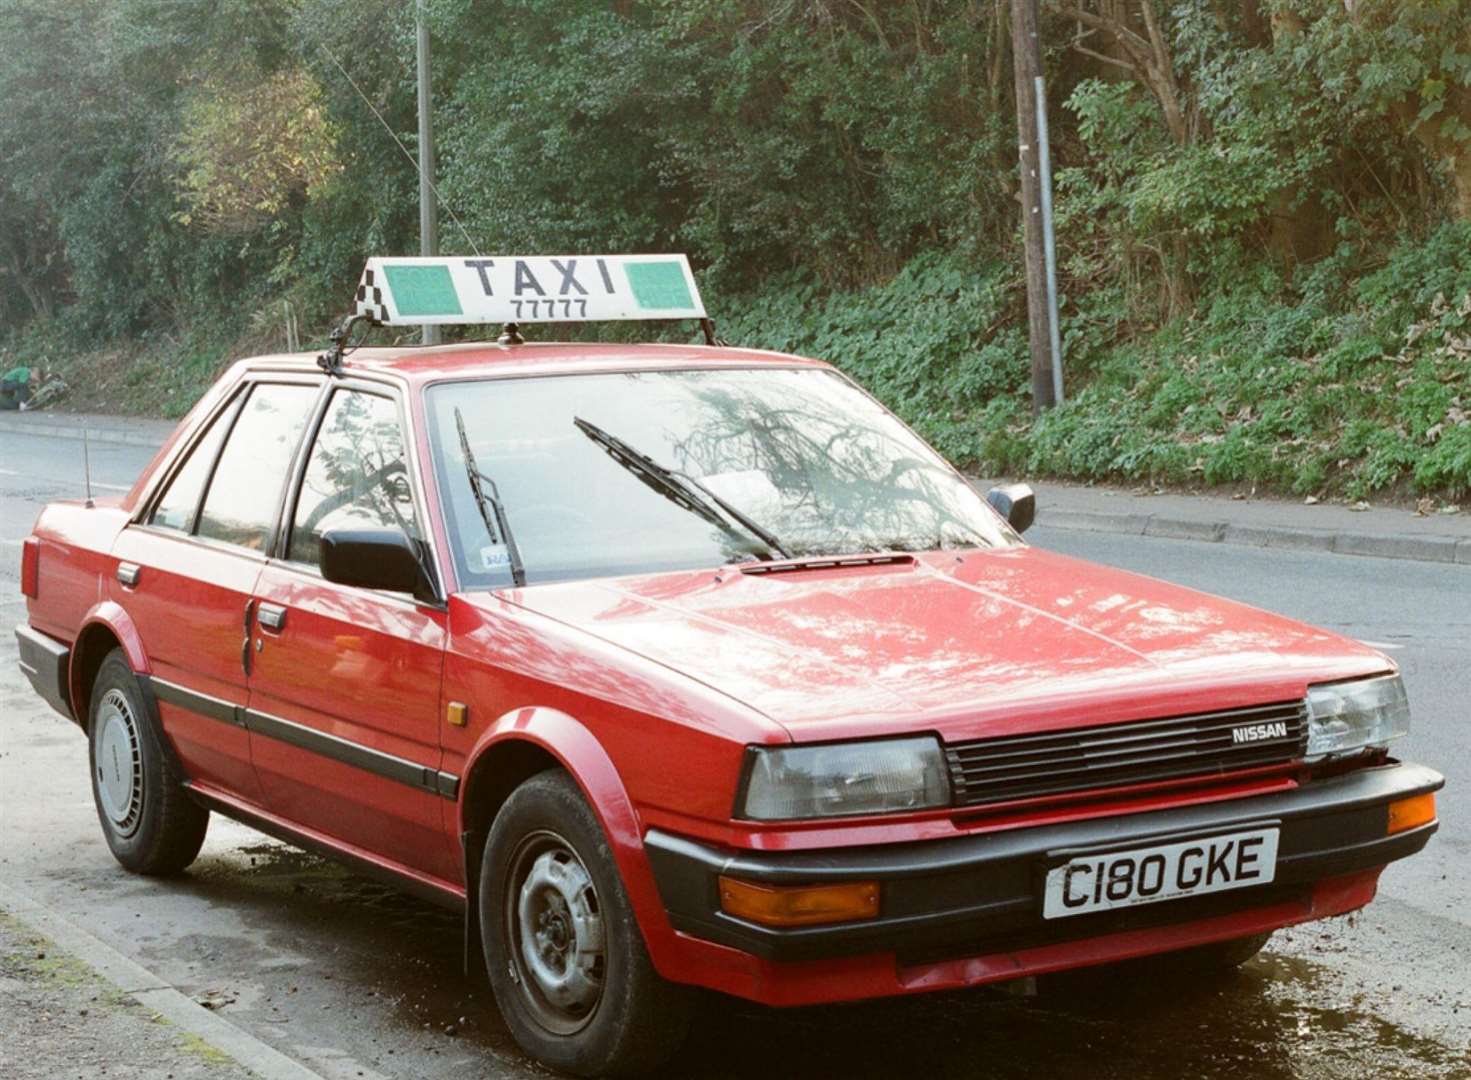 The Nissan Bluebird taxi which was blood-soaked